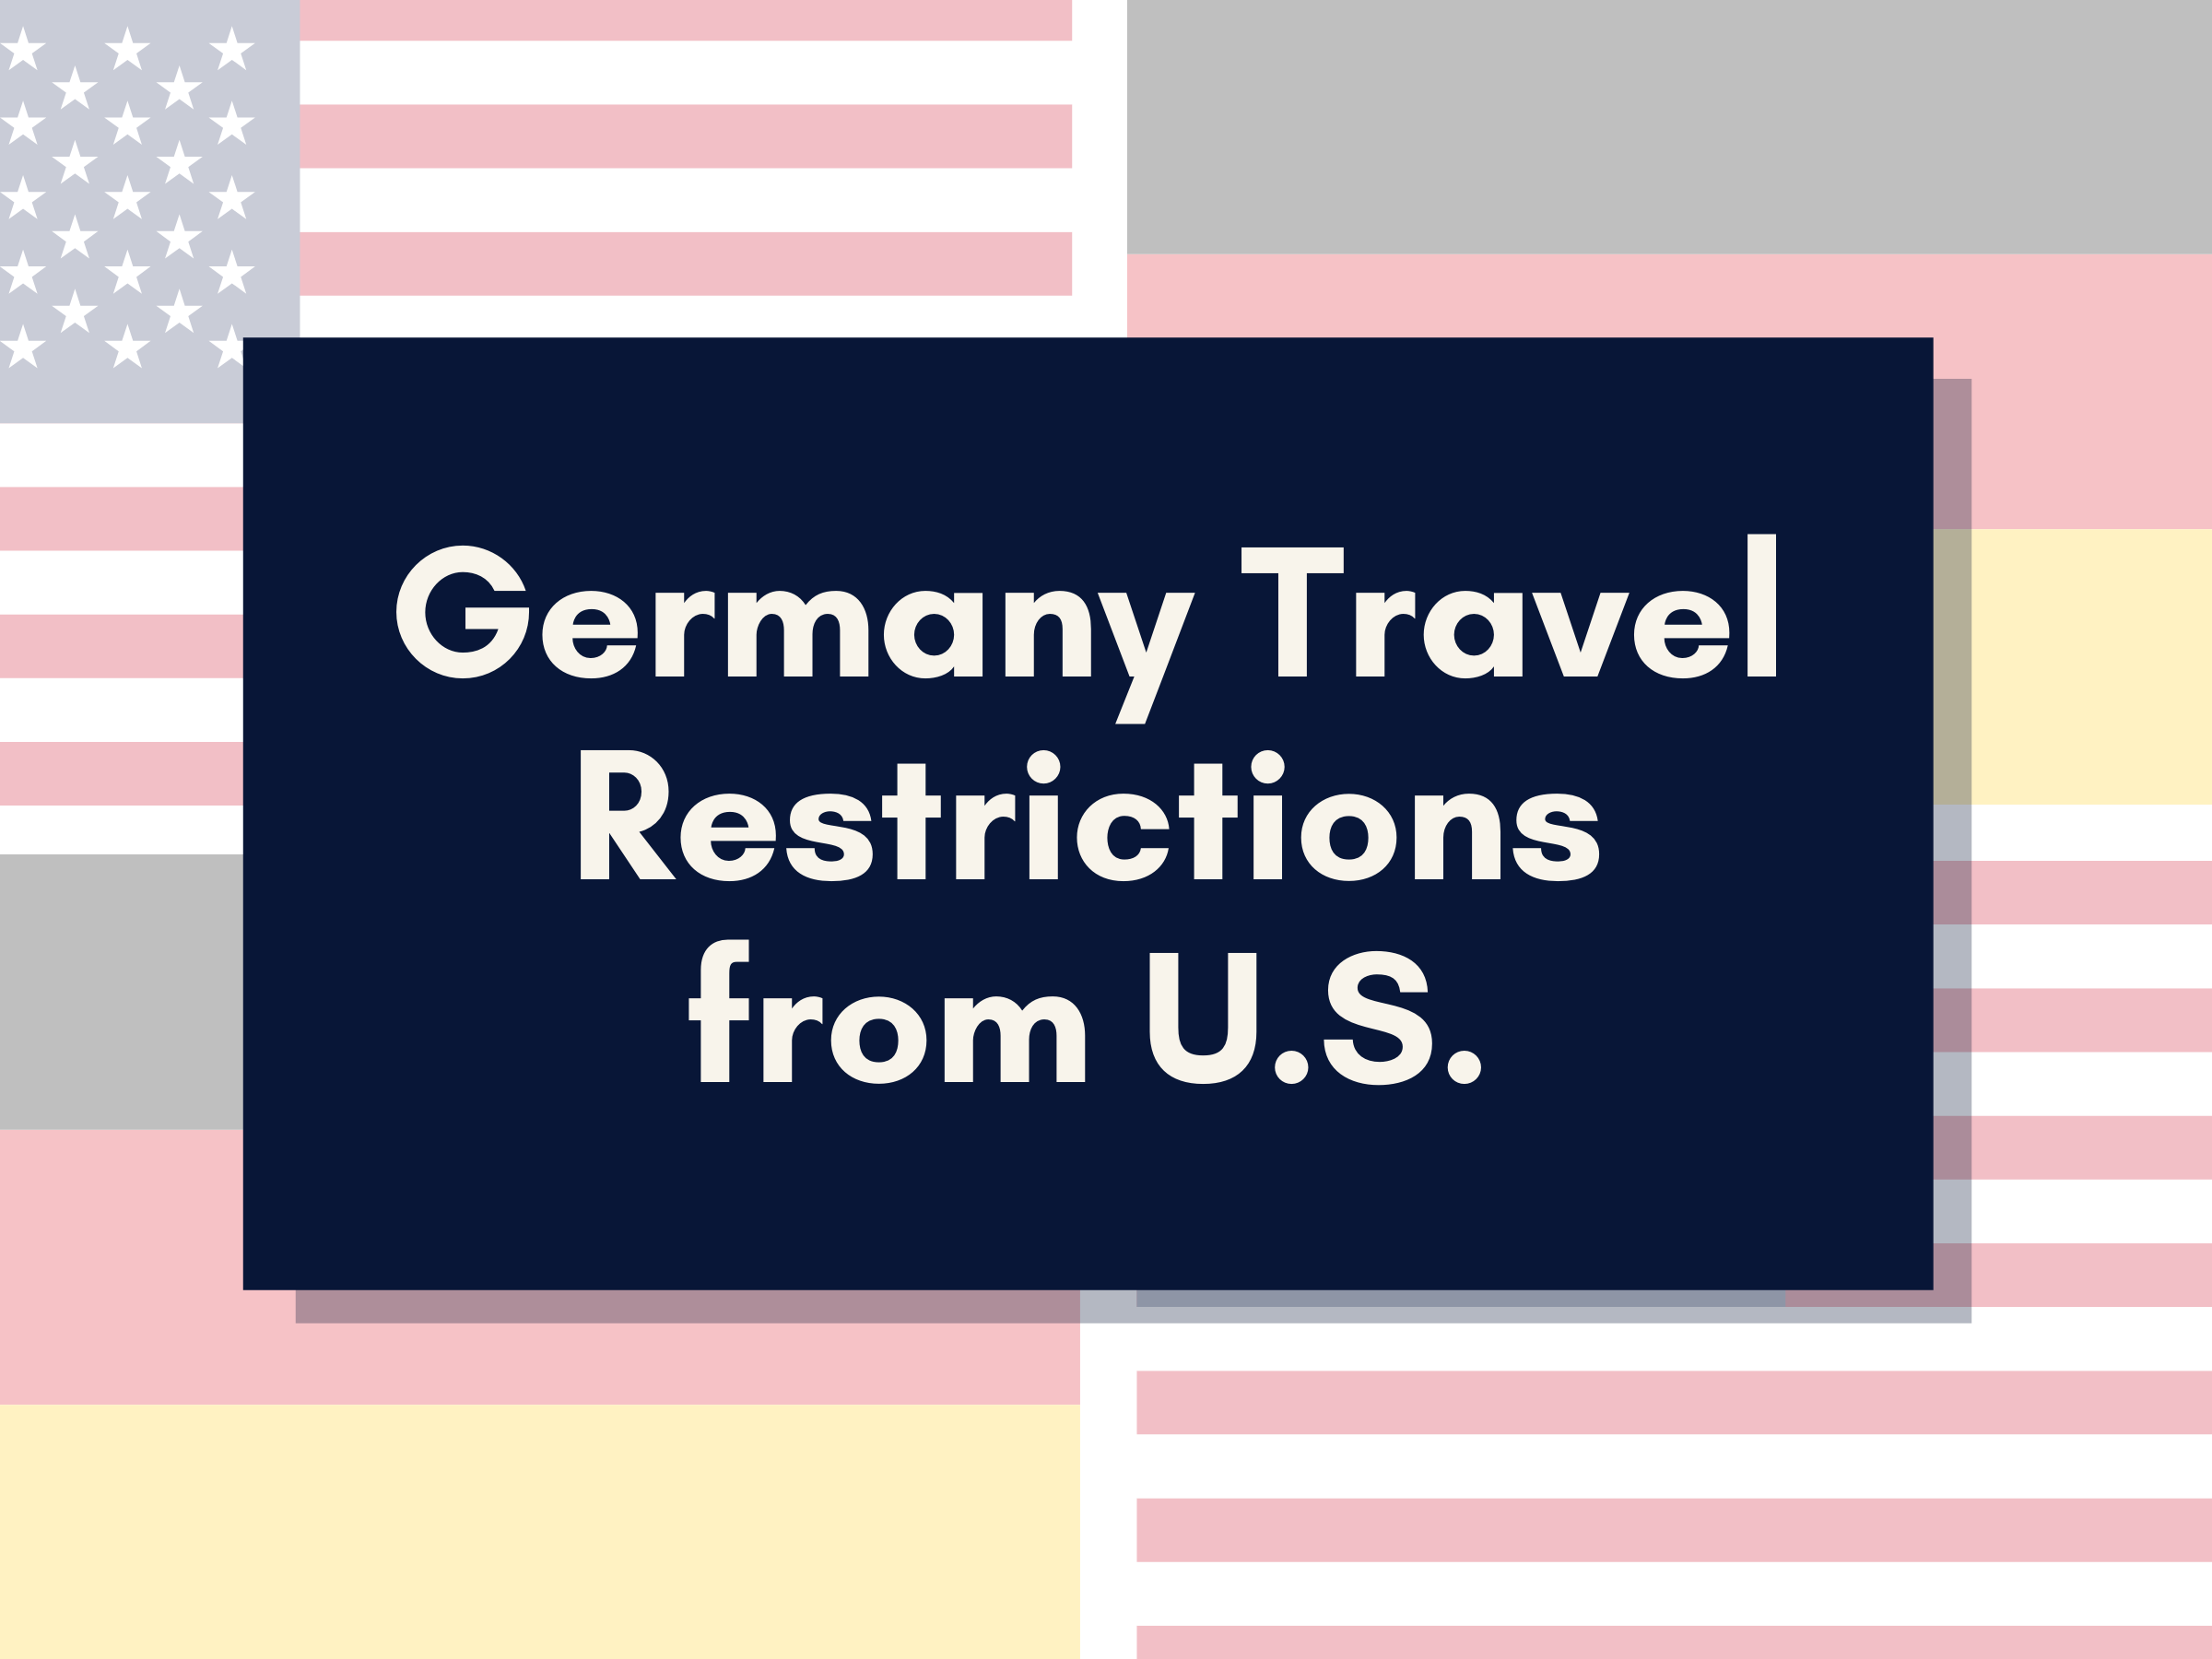 Germany Travel Restrictions from U.S.